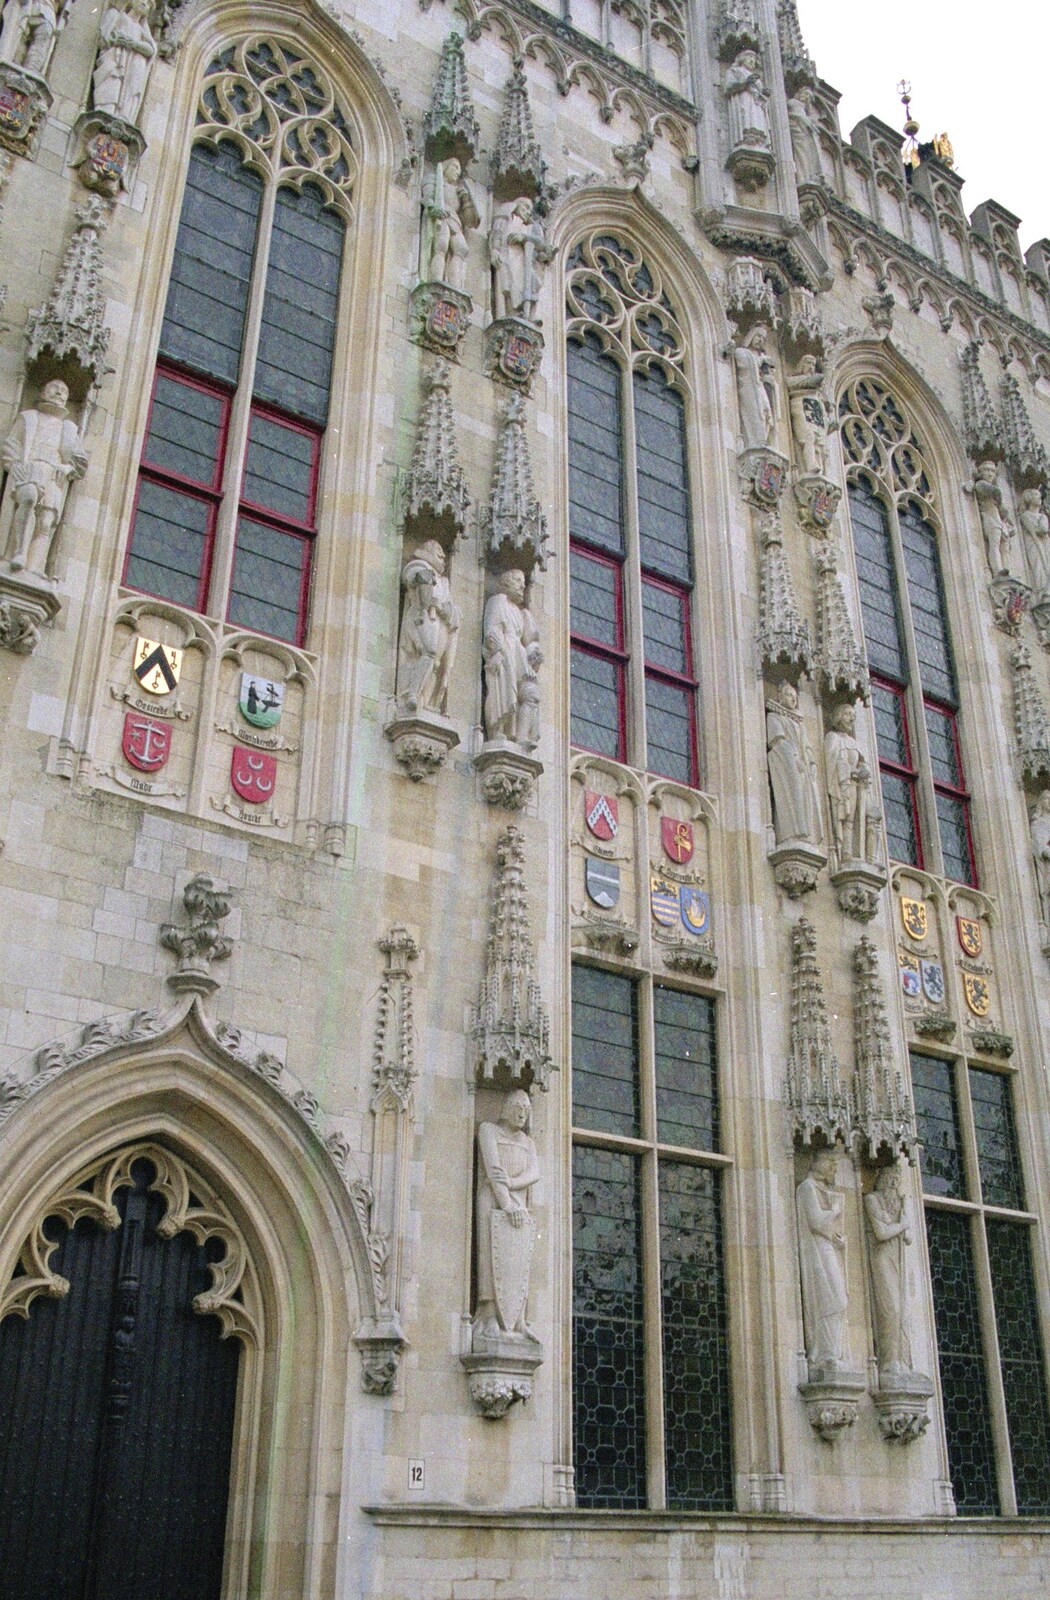 Close-up of the Hotel du Ville from CISU: An SCC Day-Trip to Bruges, Belgium - 26th May 2000